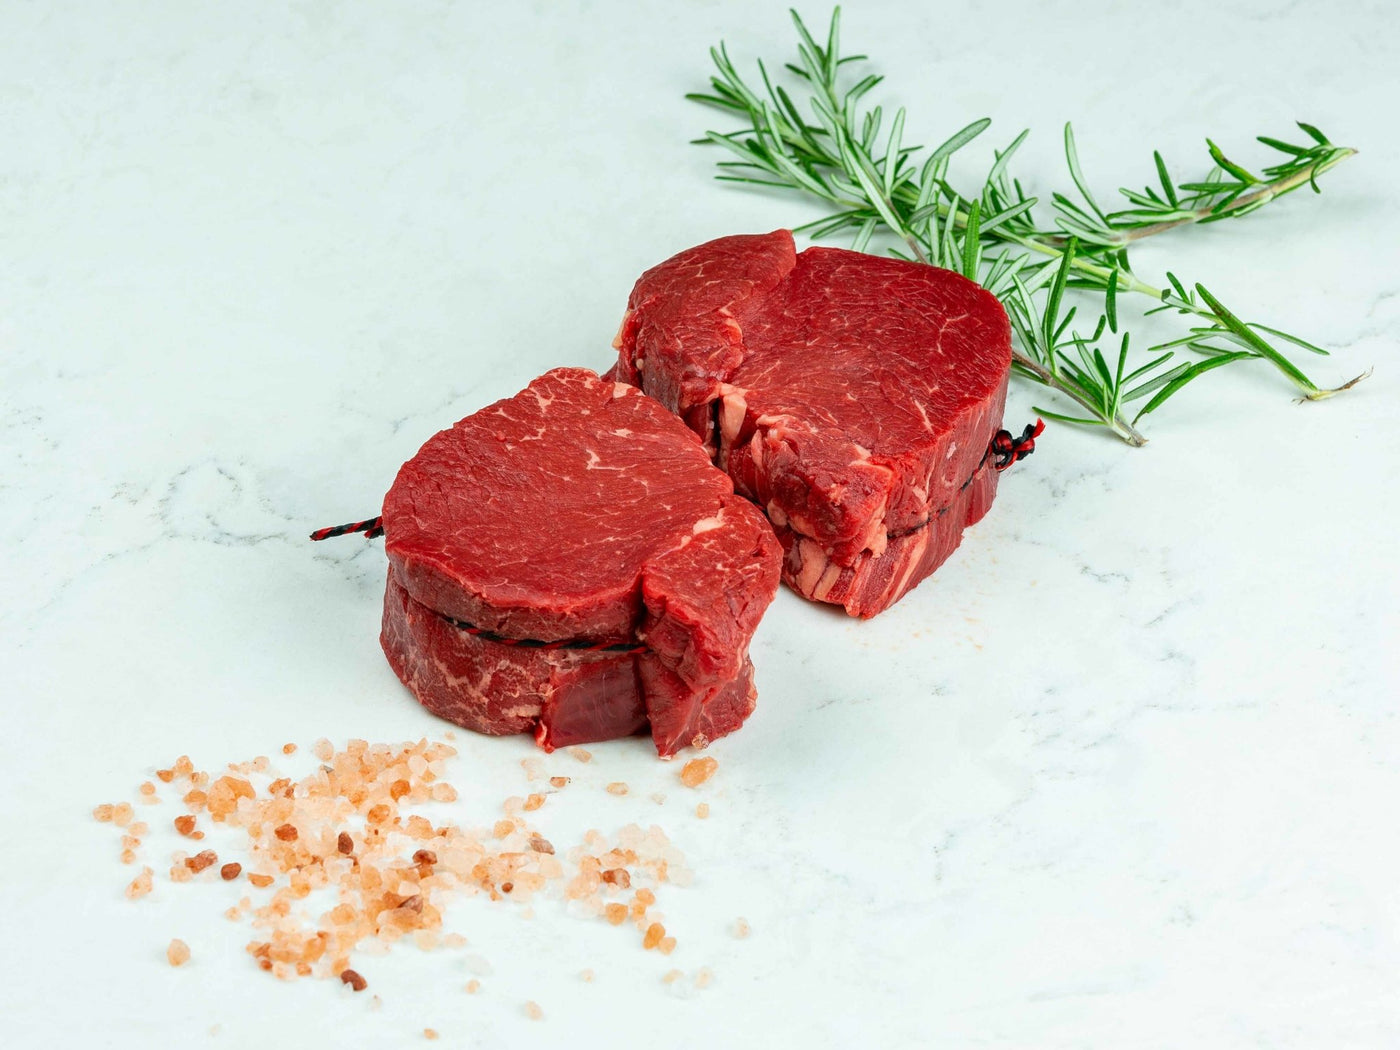 Grass Fed, Dry-Aged Fillet Steak - Beef - Thomas Joseph Butchery - Ethical Dry-Aged Meat The Best Steak UK Thomas Joseph Butchery